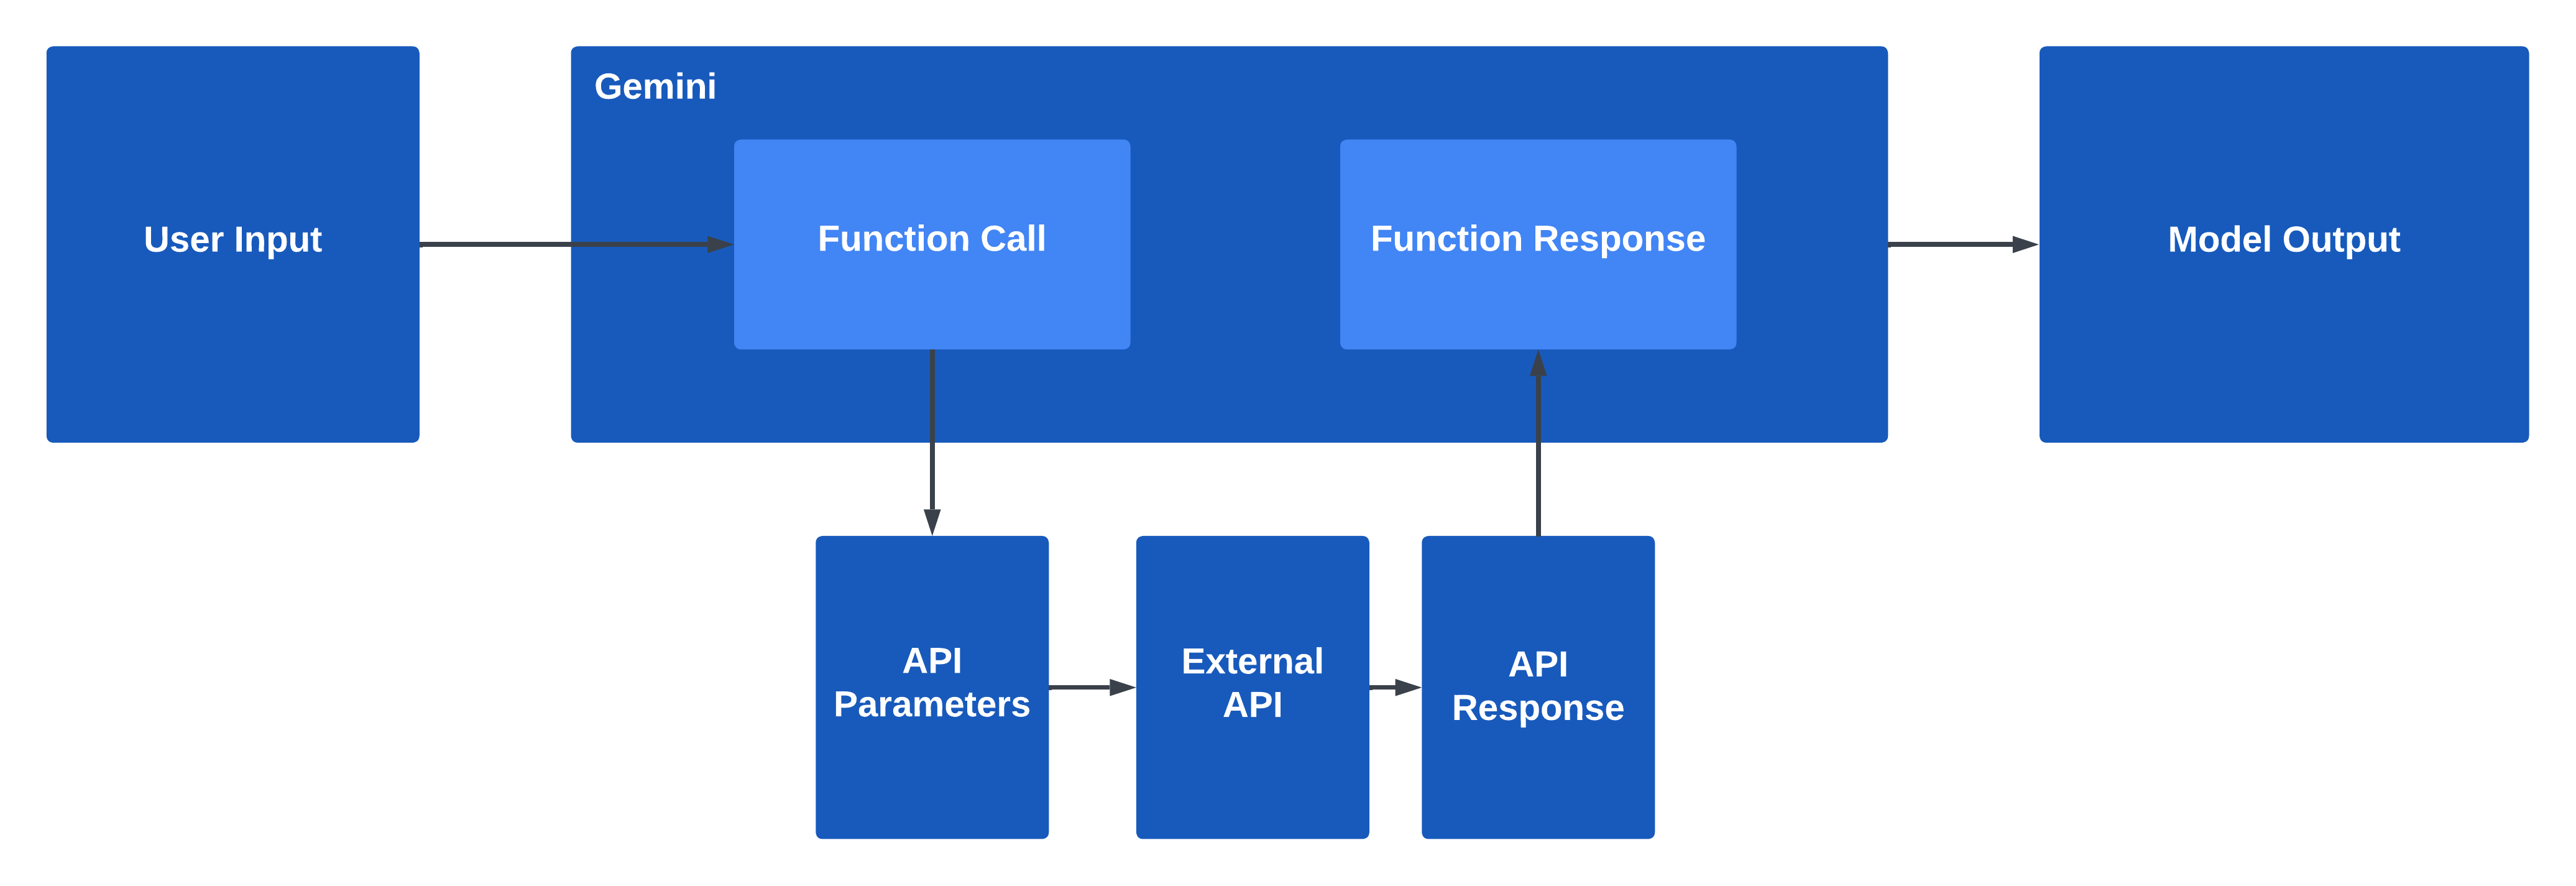 Overview of function calling in Gemini